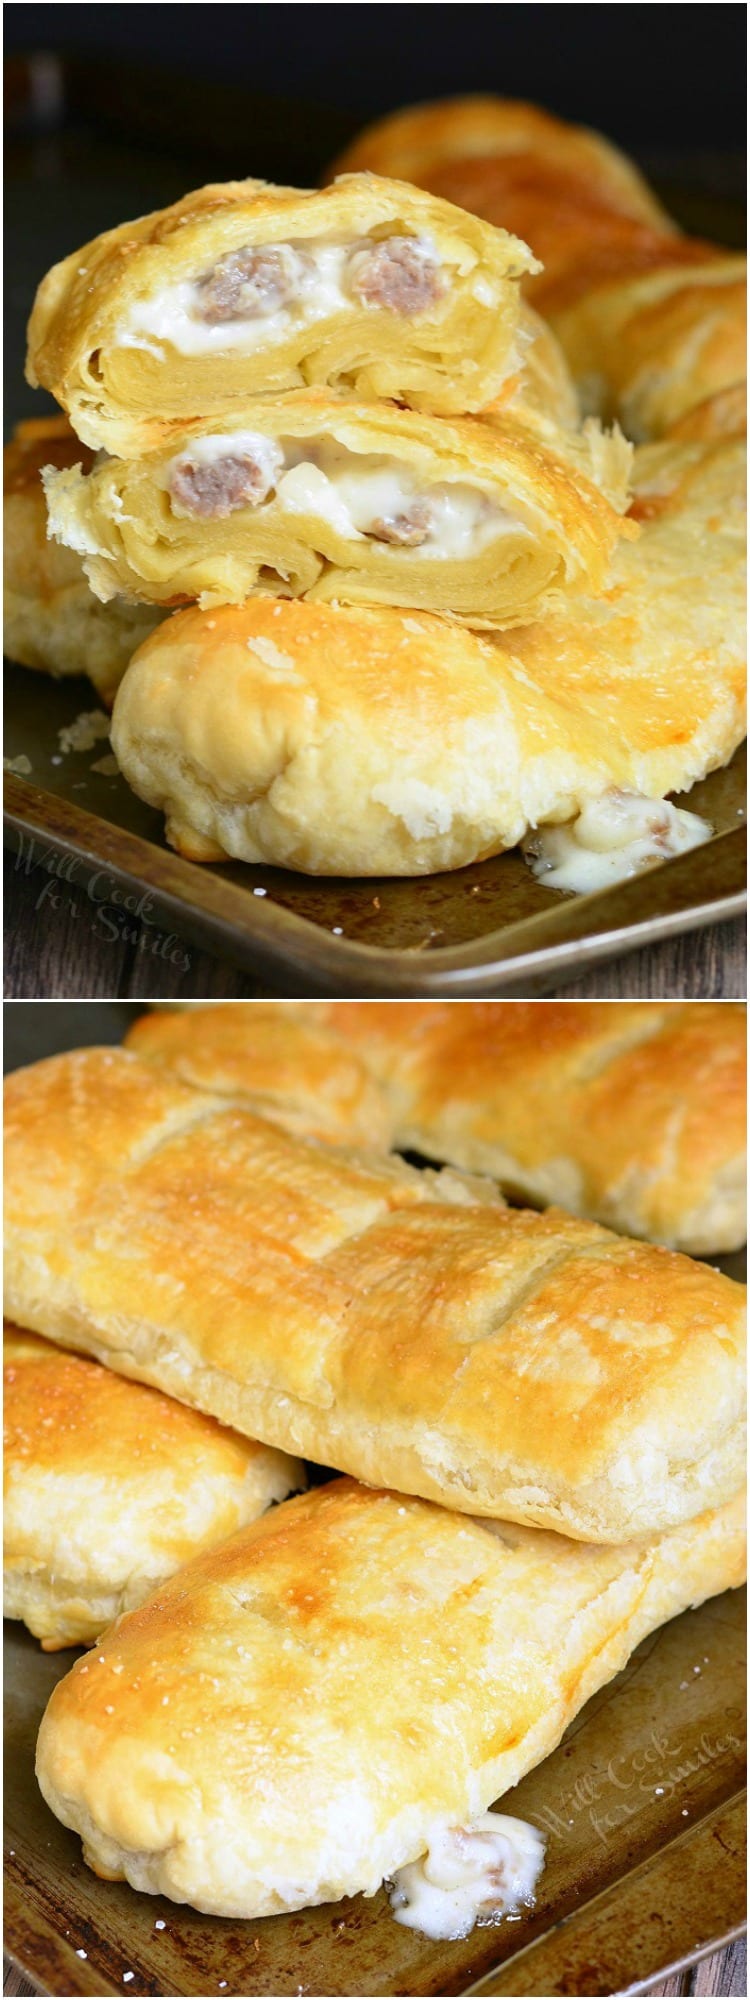 Sausage and Gravy Pastry | from willcookforsmiles.com